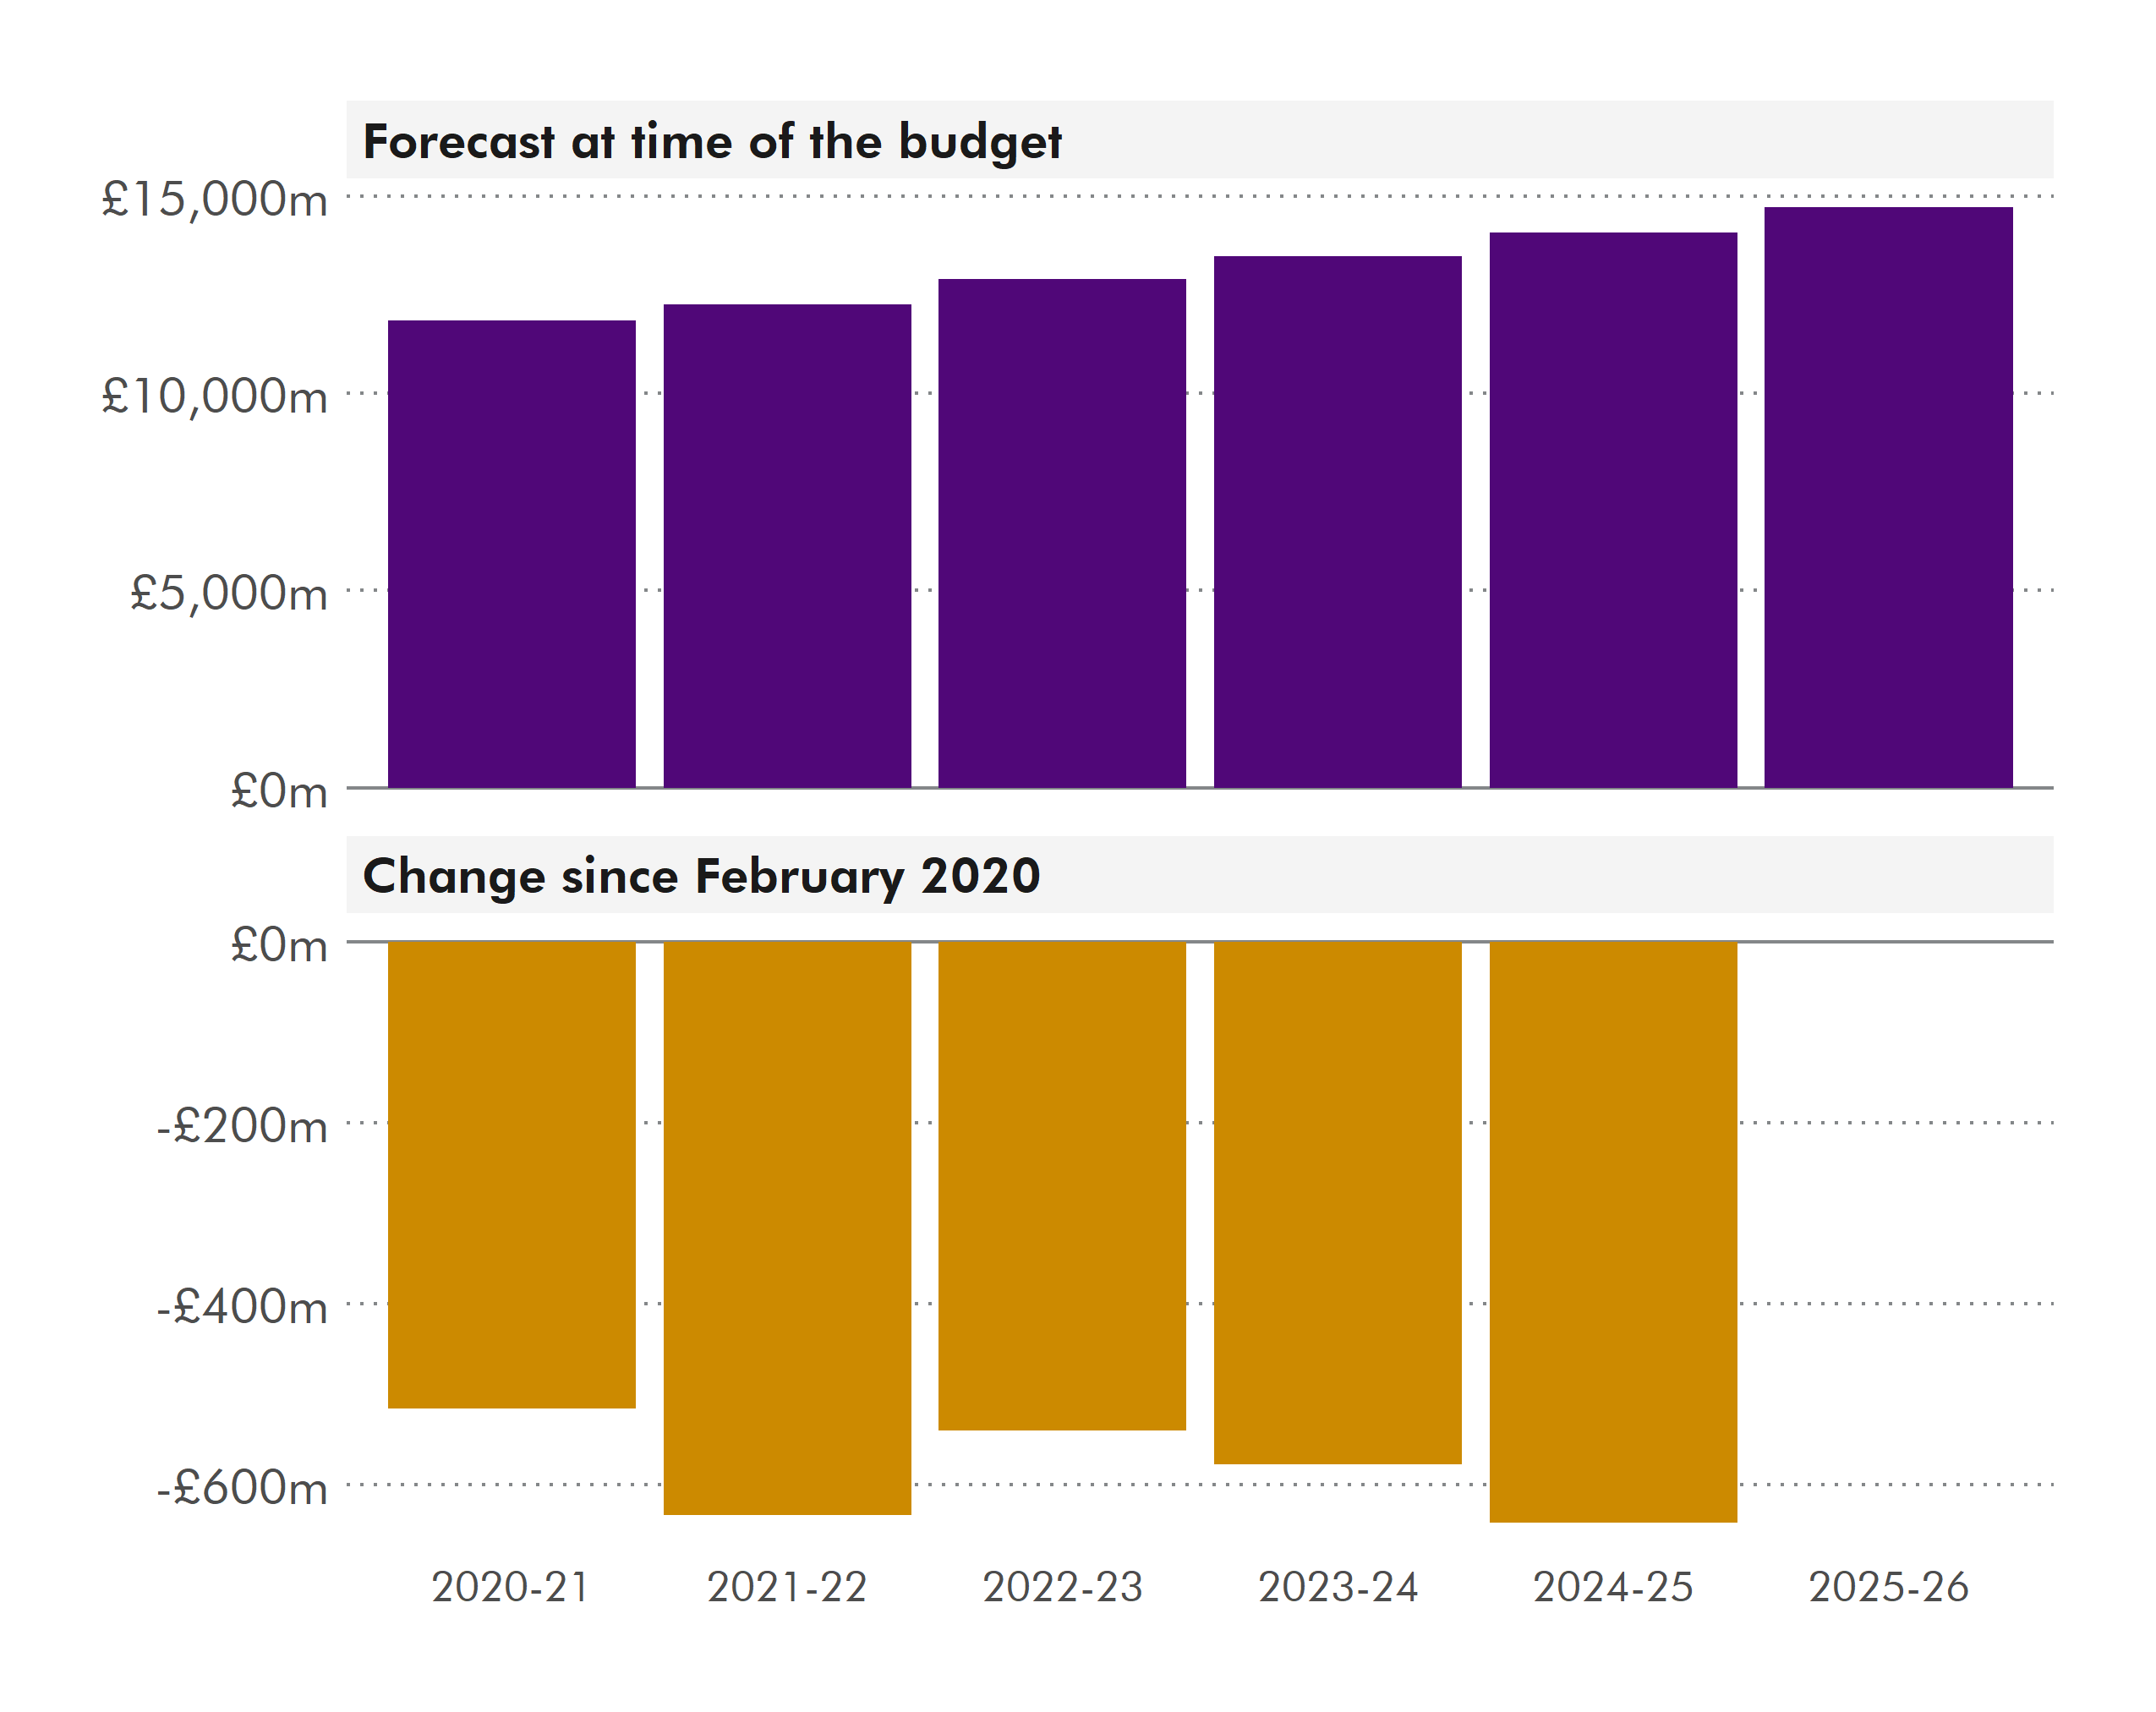 Figure 3 shows that income tax was forecast at Budget 2020-21 to rise from just over £10 million in 2020-21 to just under £15 million in 2025-26. It then shows at Budget 2021-22 the forecast is just over £500 million less in 2020-21 to just over £600 million less in 2024-25.